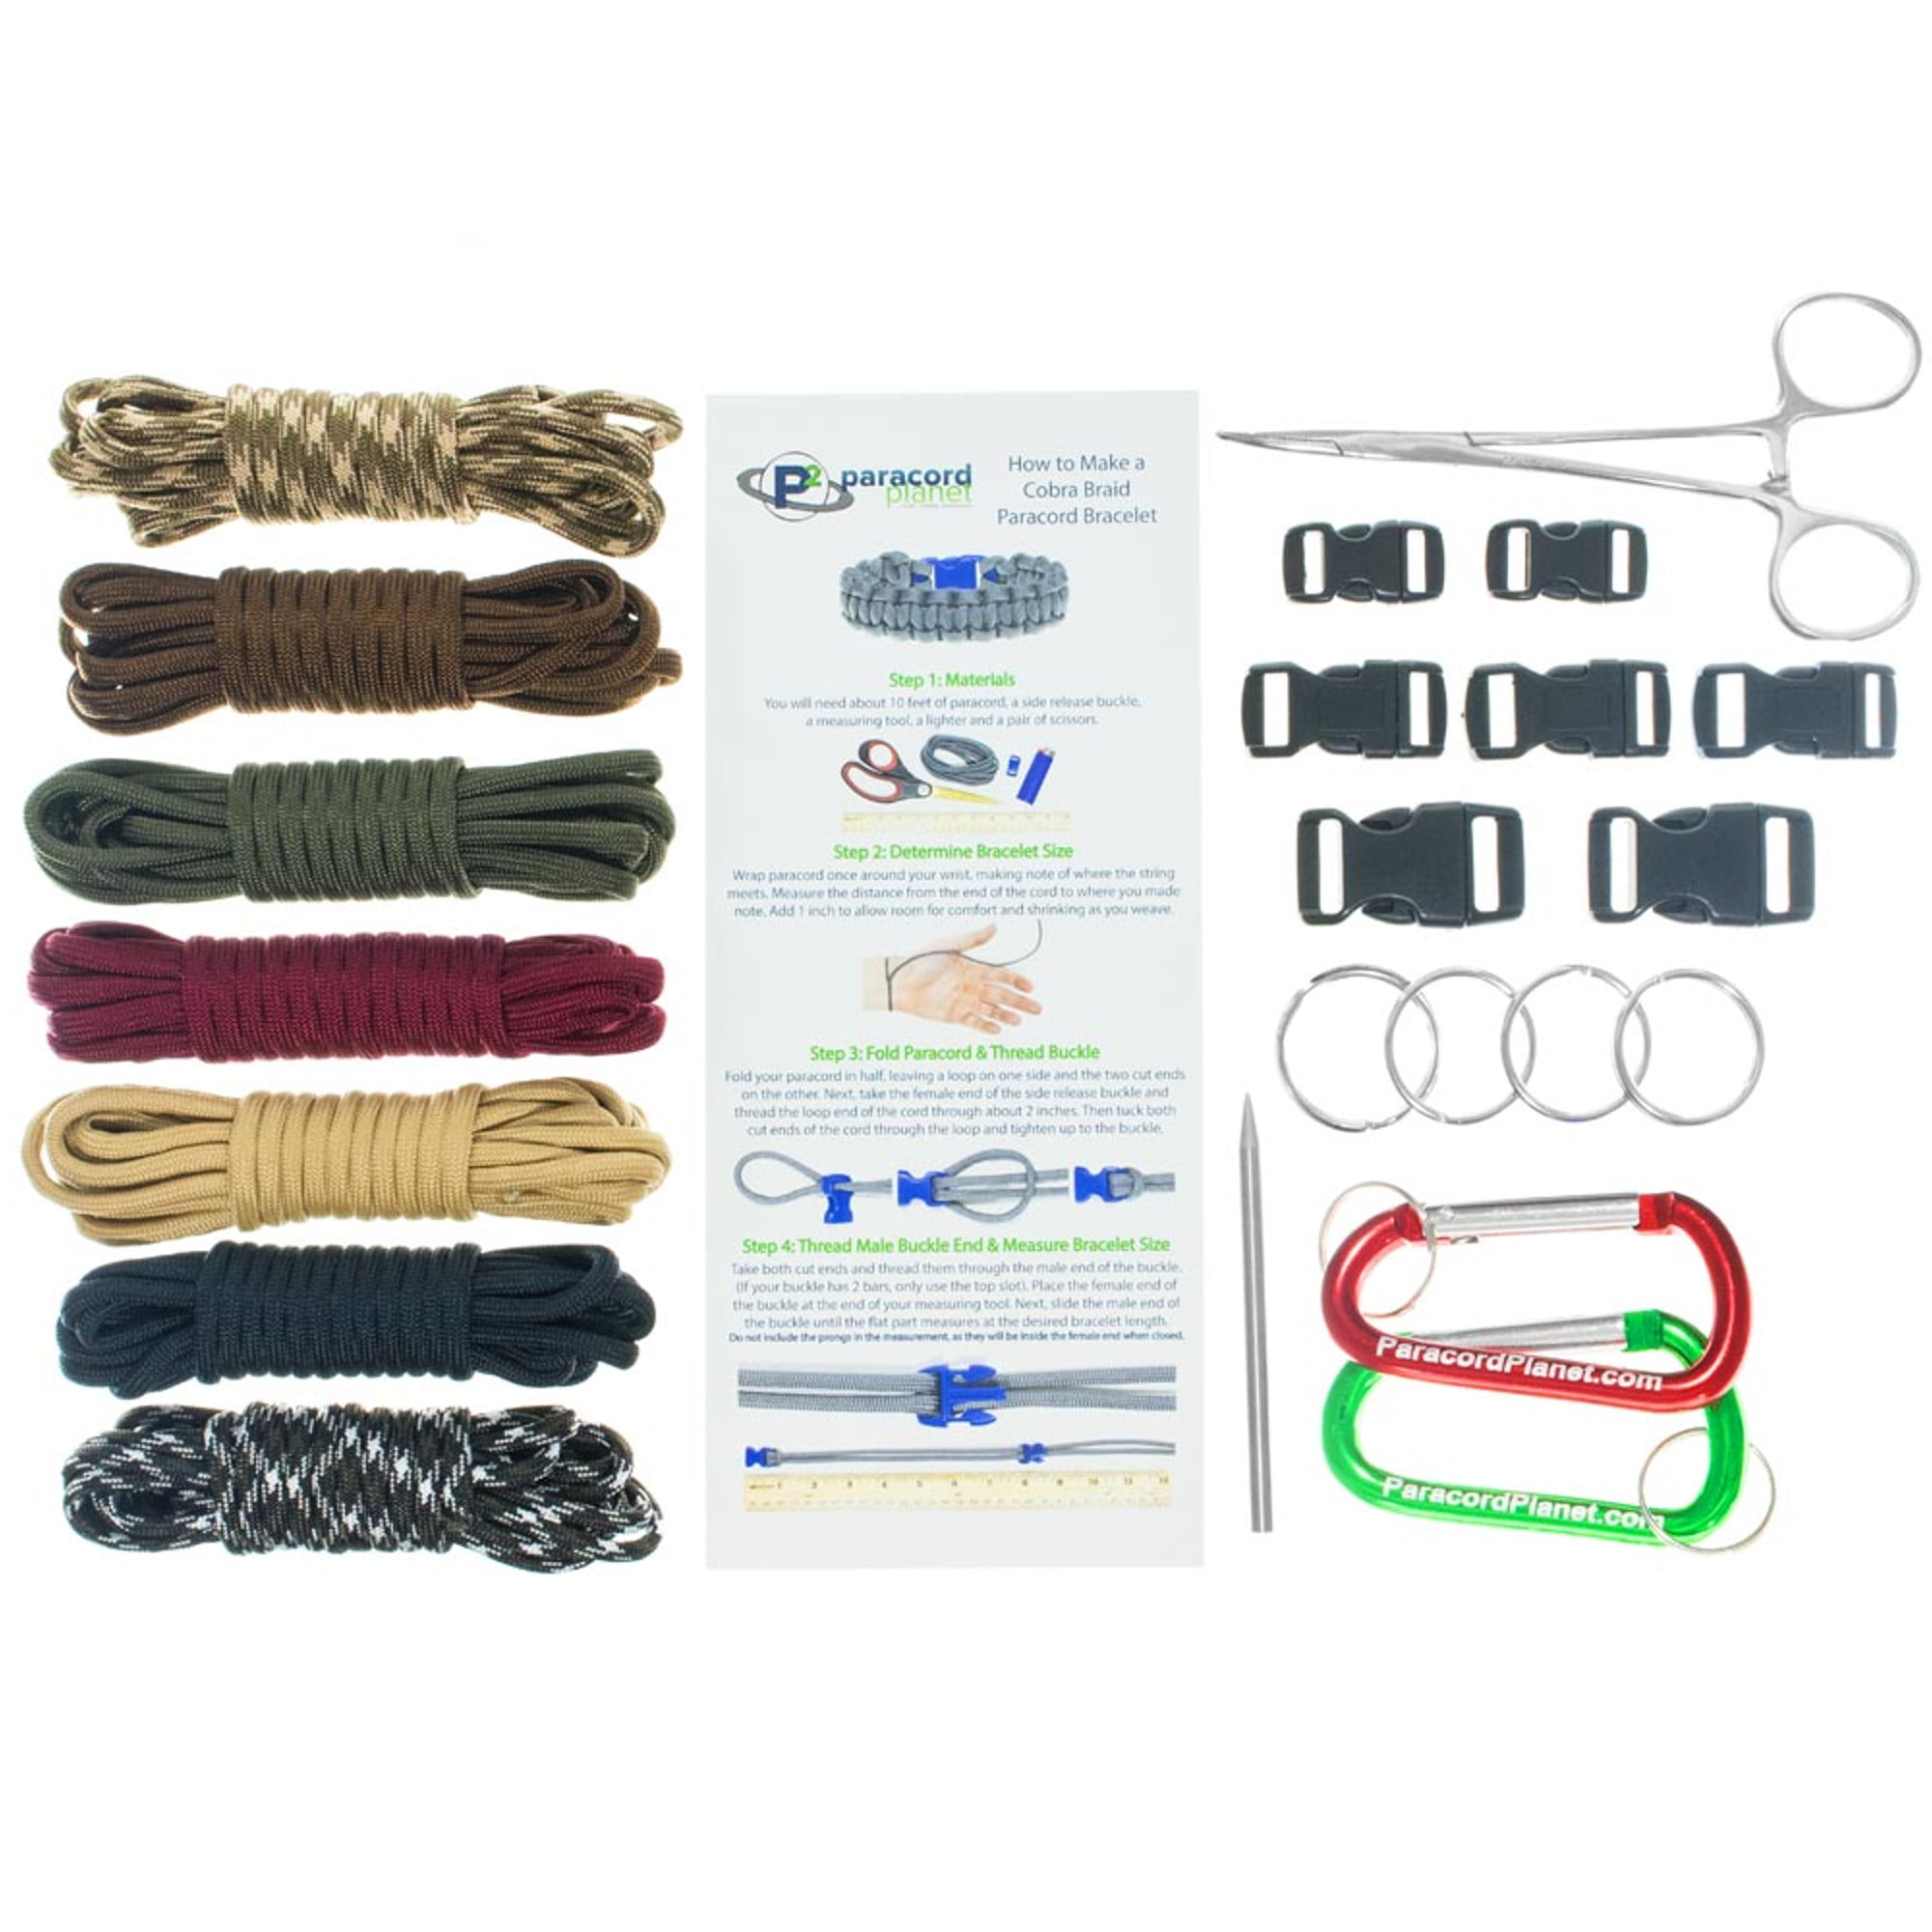 Paracord 550 Survival Paracord Bracelet Rope Kits 30 Colors with Buckles Carabiner Multifunction Survival Parachute Cord and Key Rings 